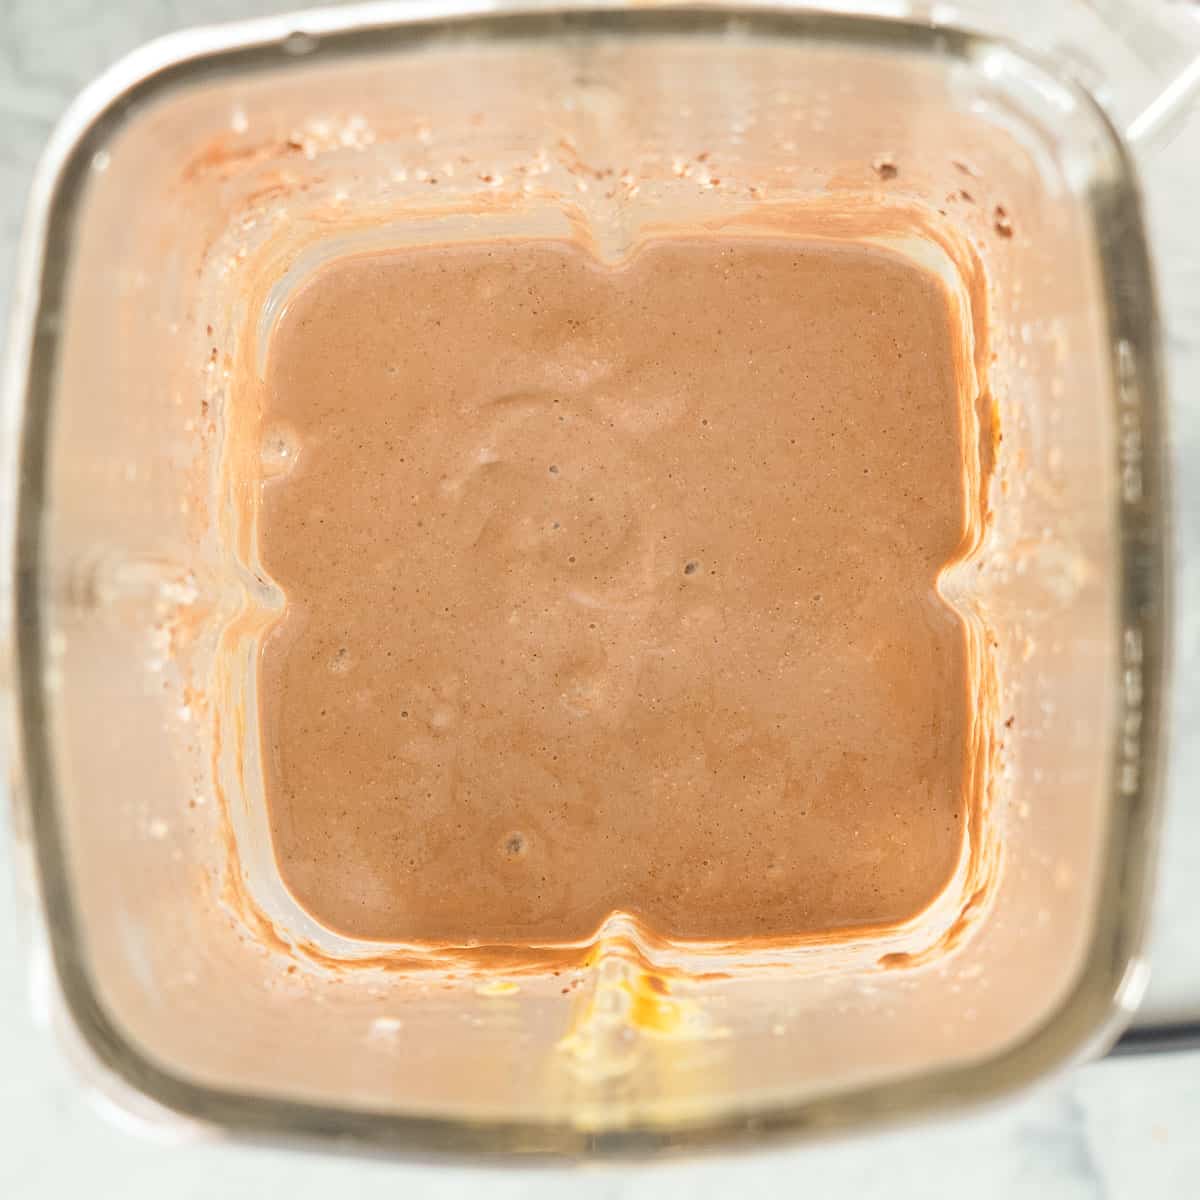 Looking down into a blender jug of smooth thick chocolate smoothie.